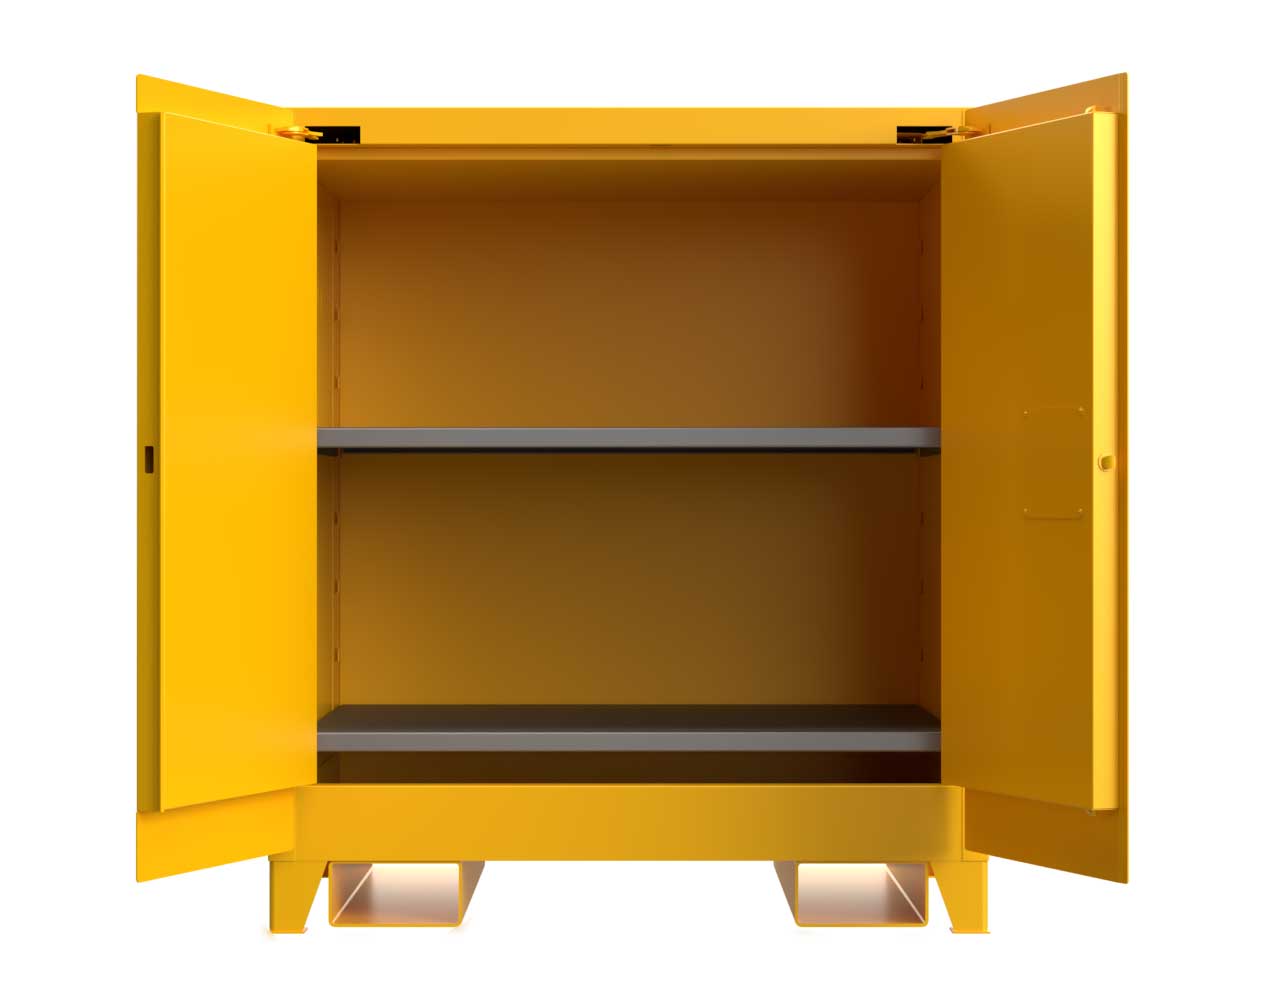 Extra Heavy Duty 14 GA 60 Gallon Flammable Safety Cabinet with Manual-Closing Doors, 2 Shelves, Forklift Pockets - 43 In. W x 34 In. D x 49 In. H